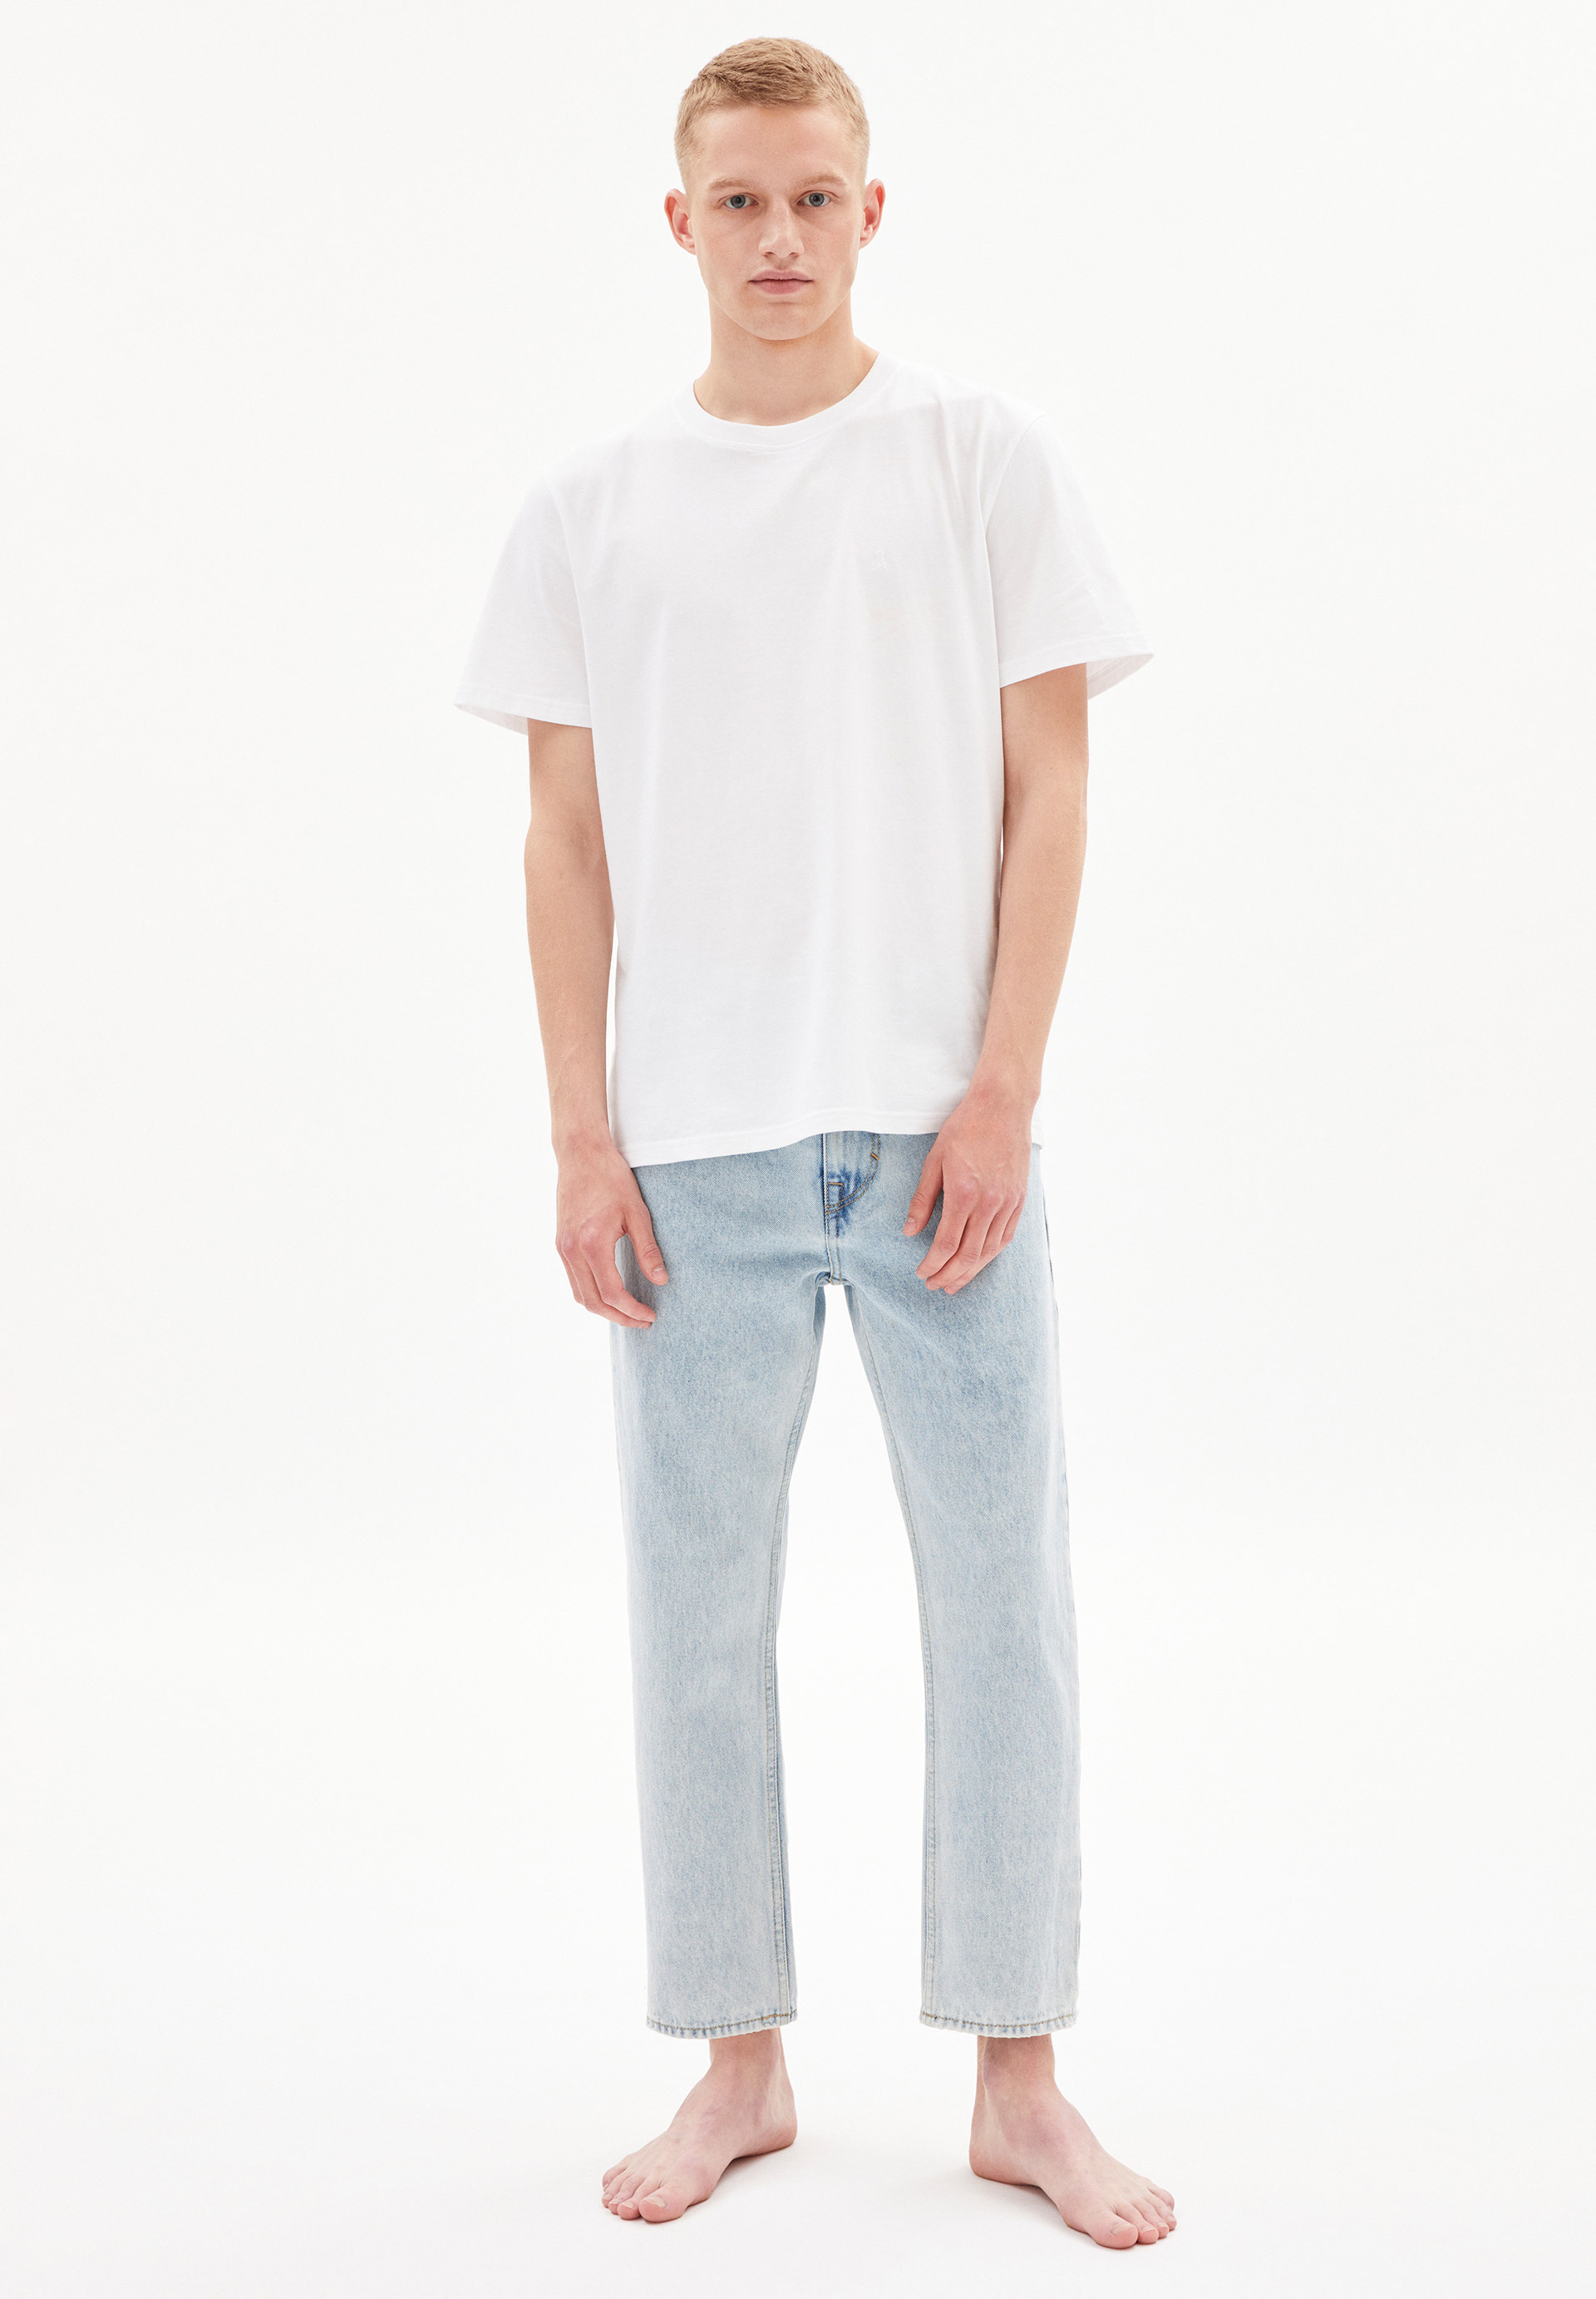 MAAKX Loose Fit Cropped Denim made of Organic Cotton